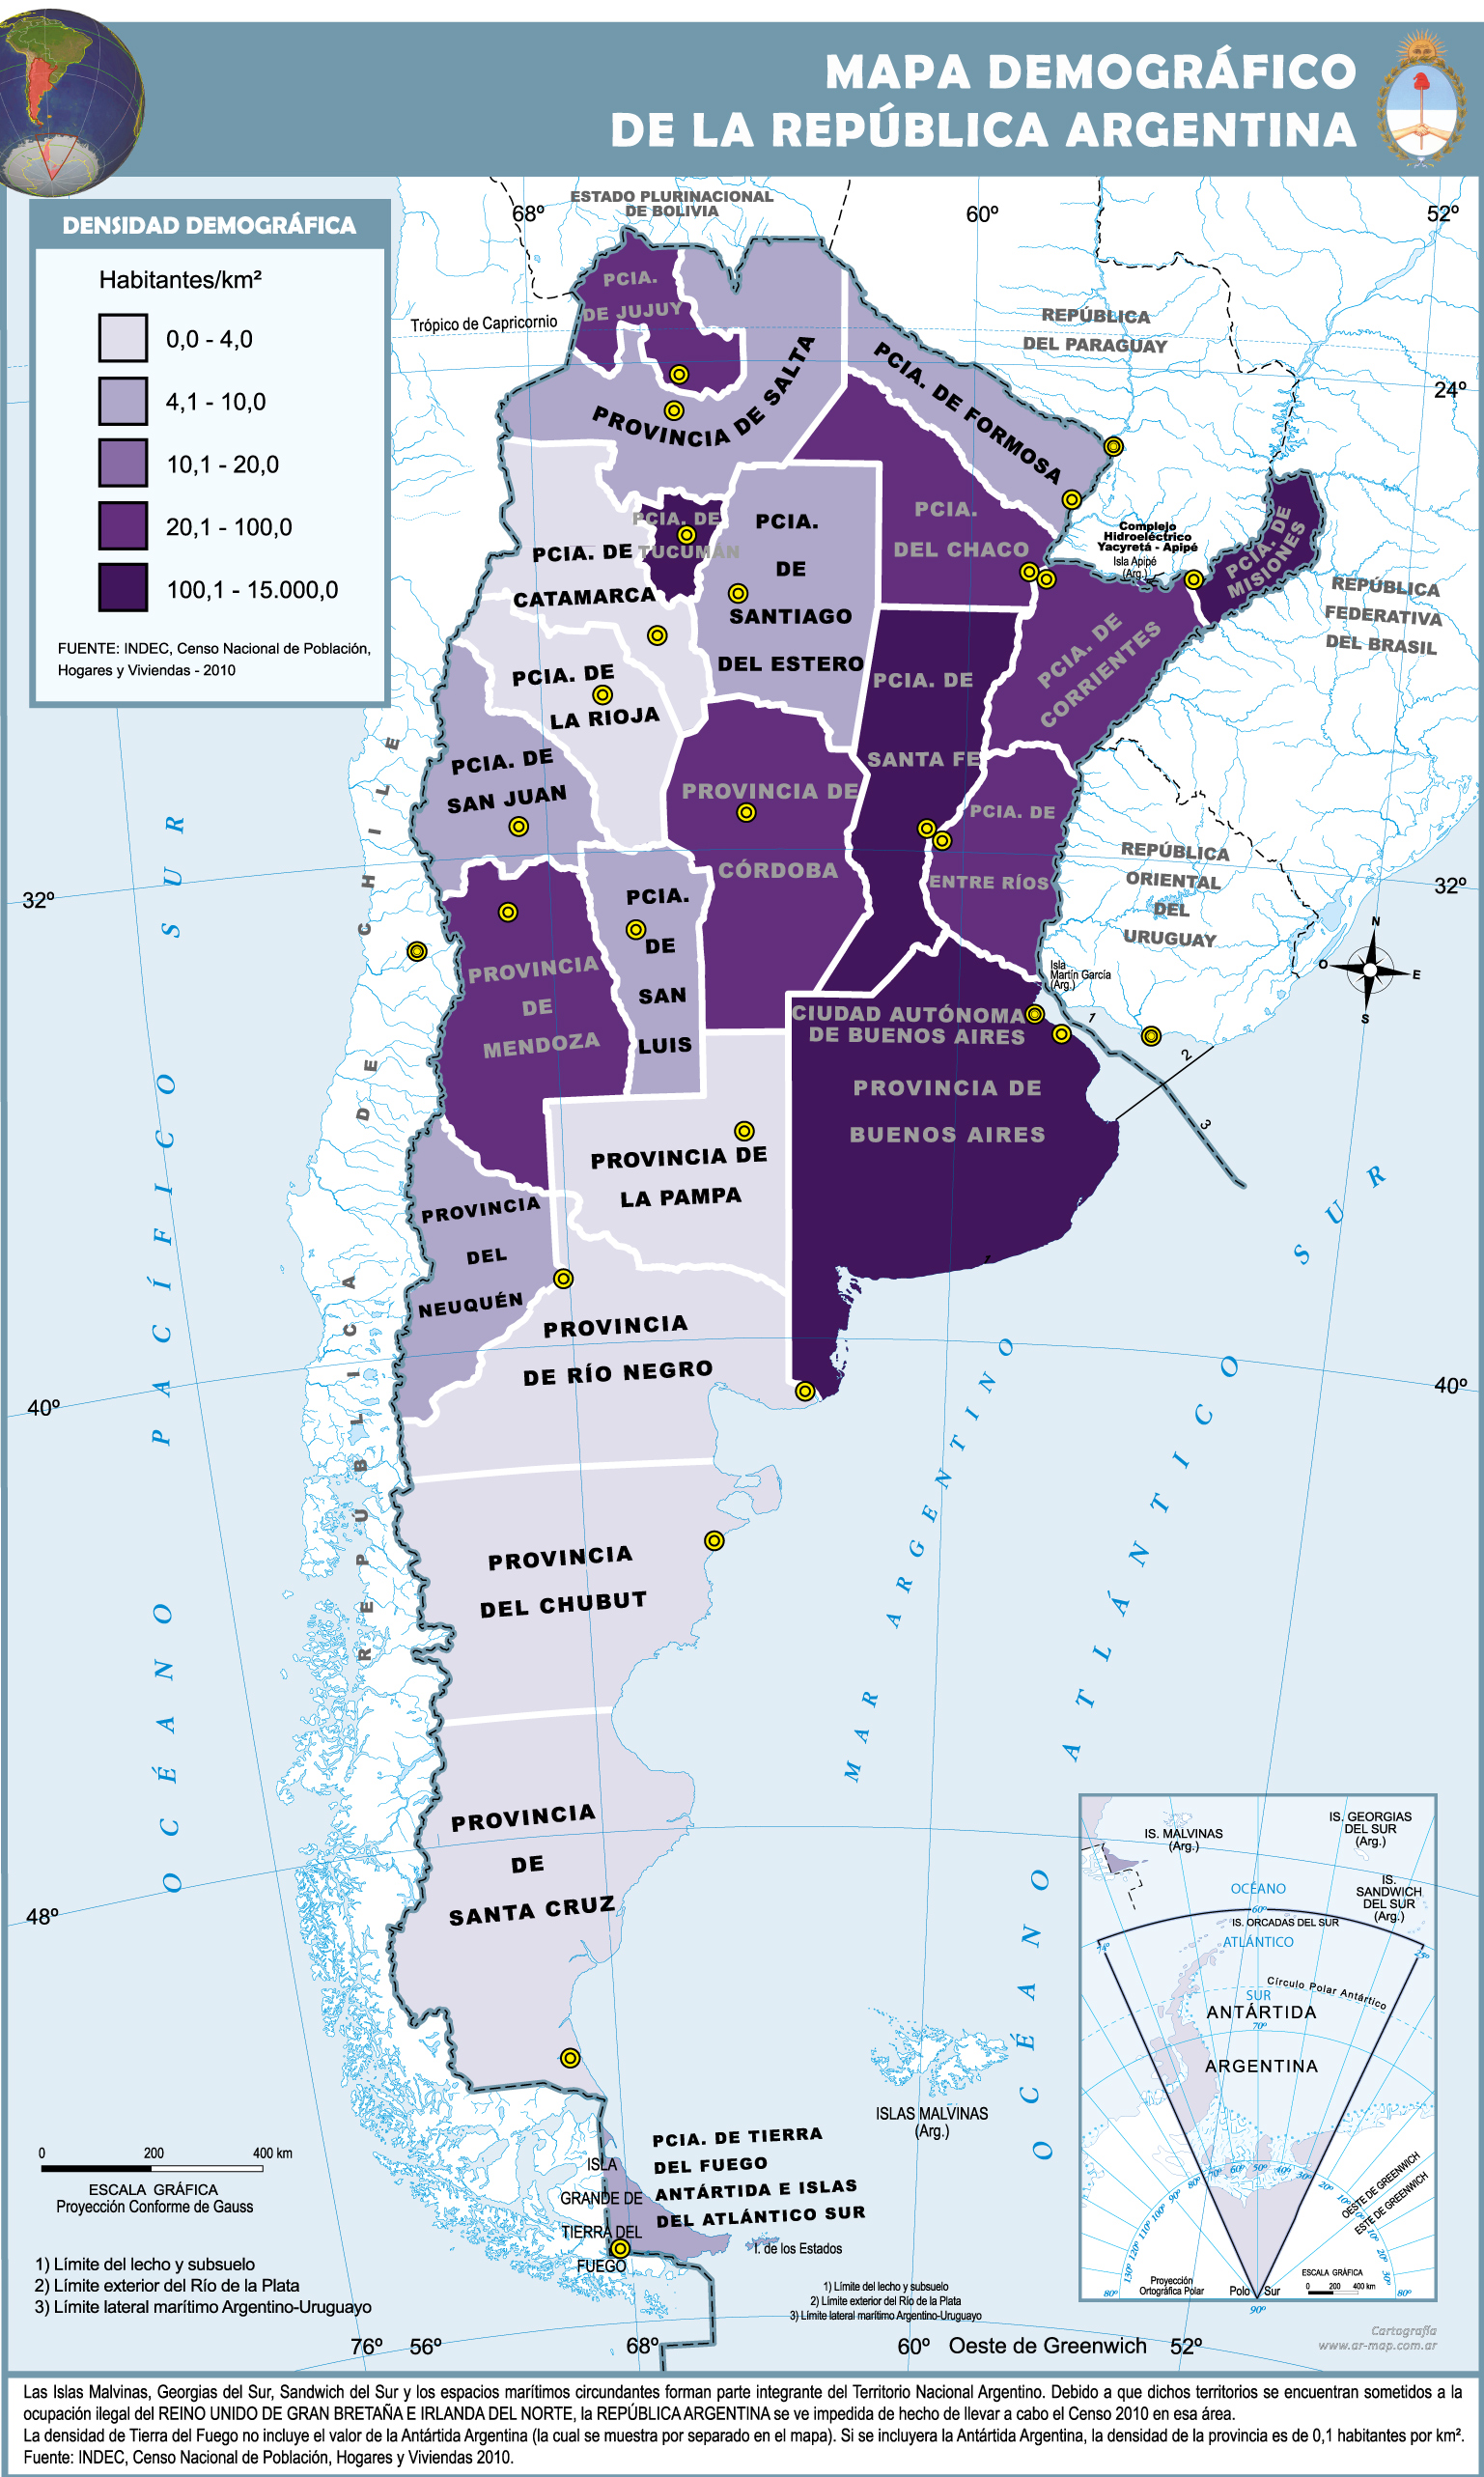 Demographic map of Argentina Gifex